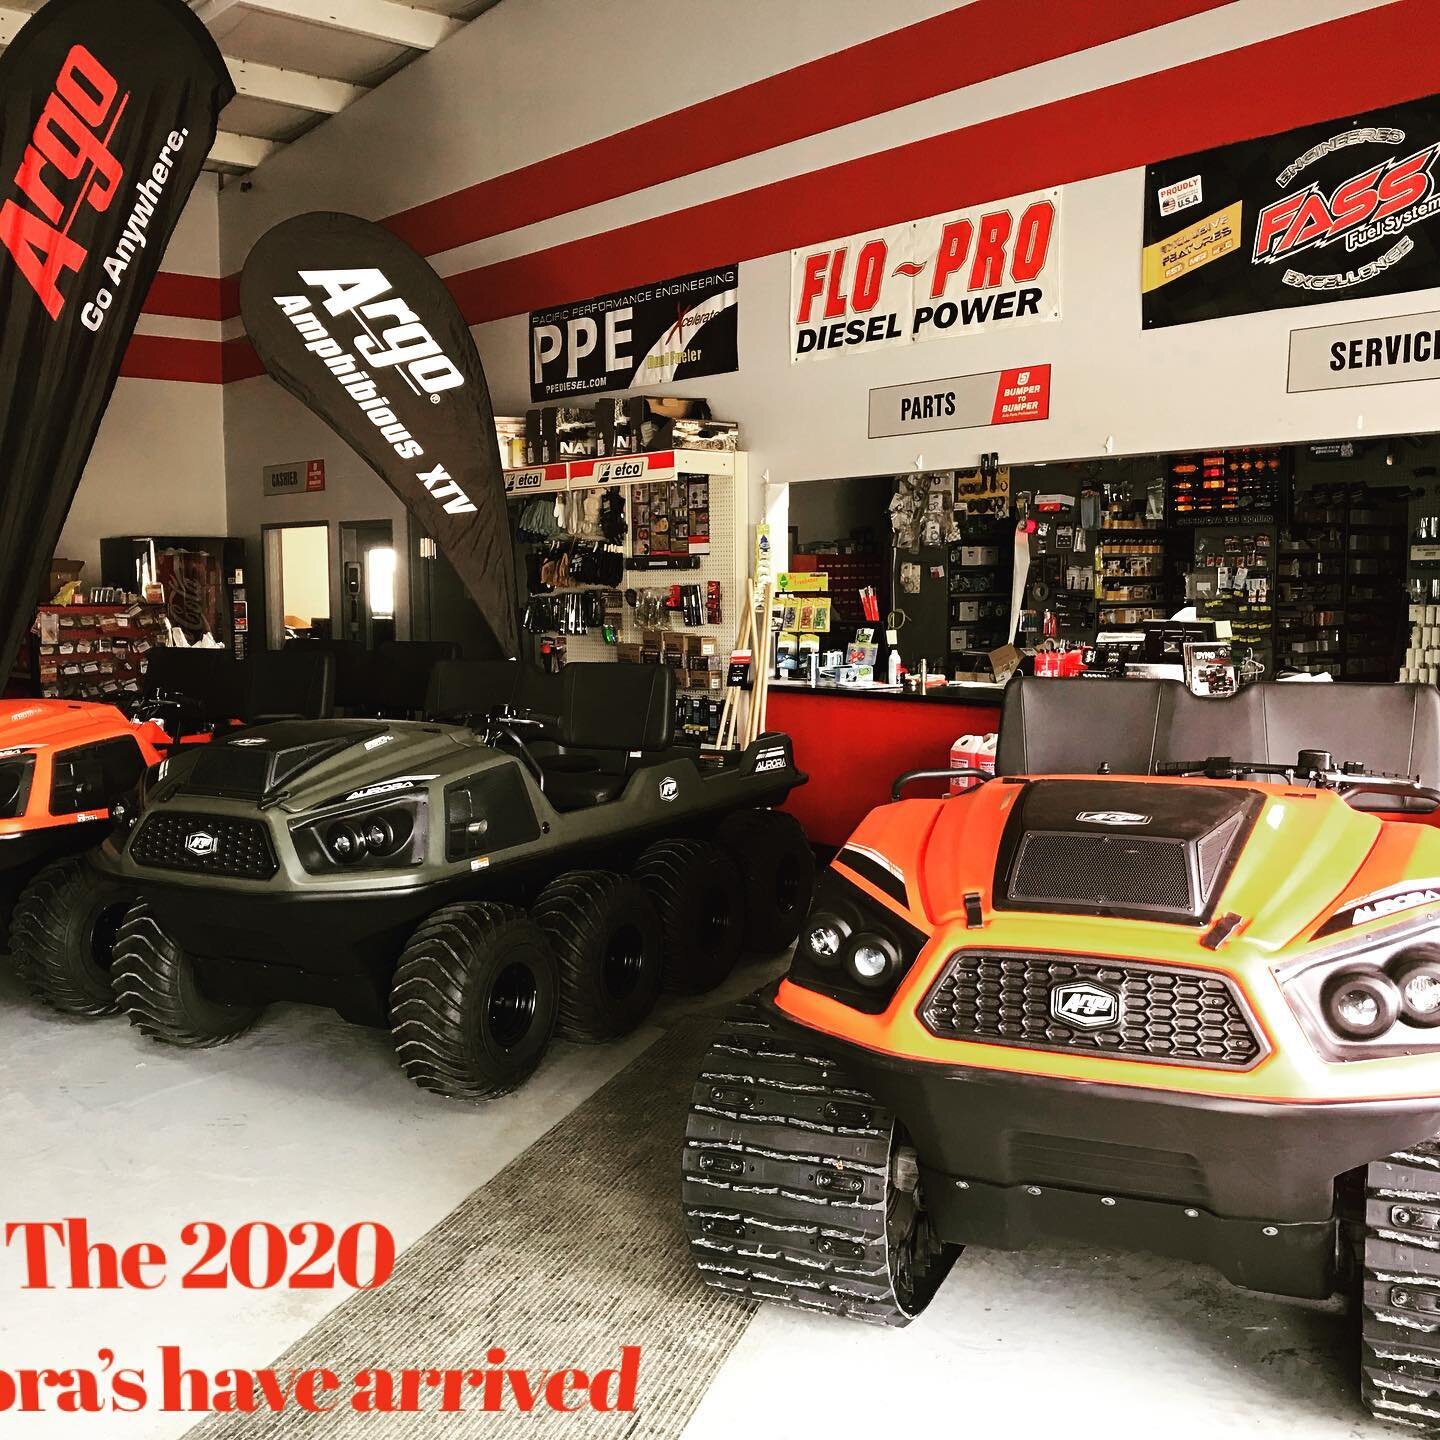 🌲They have arrived the new 2020 Argo Auroras , all new models including the 40hp 950 .

ARGO NORTH is the authorized ARGO dealer for Alberta North-East. Whether you&rsquo;re looking to purchase, rent or are needing maintenance on your unit, we&rsquo